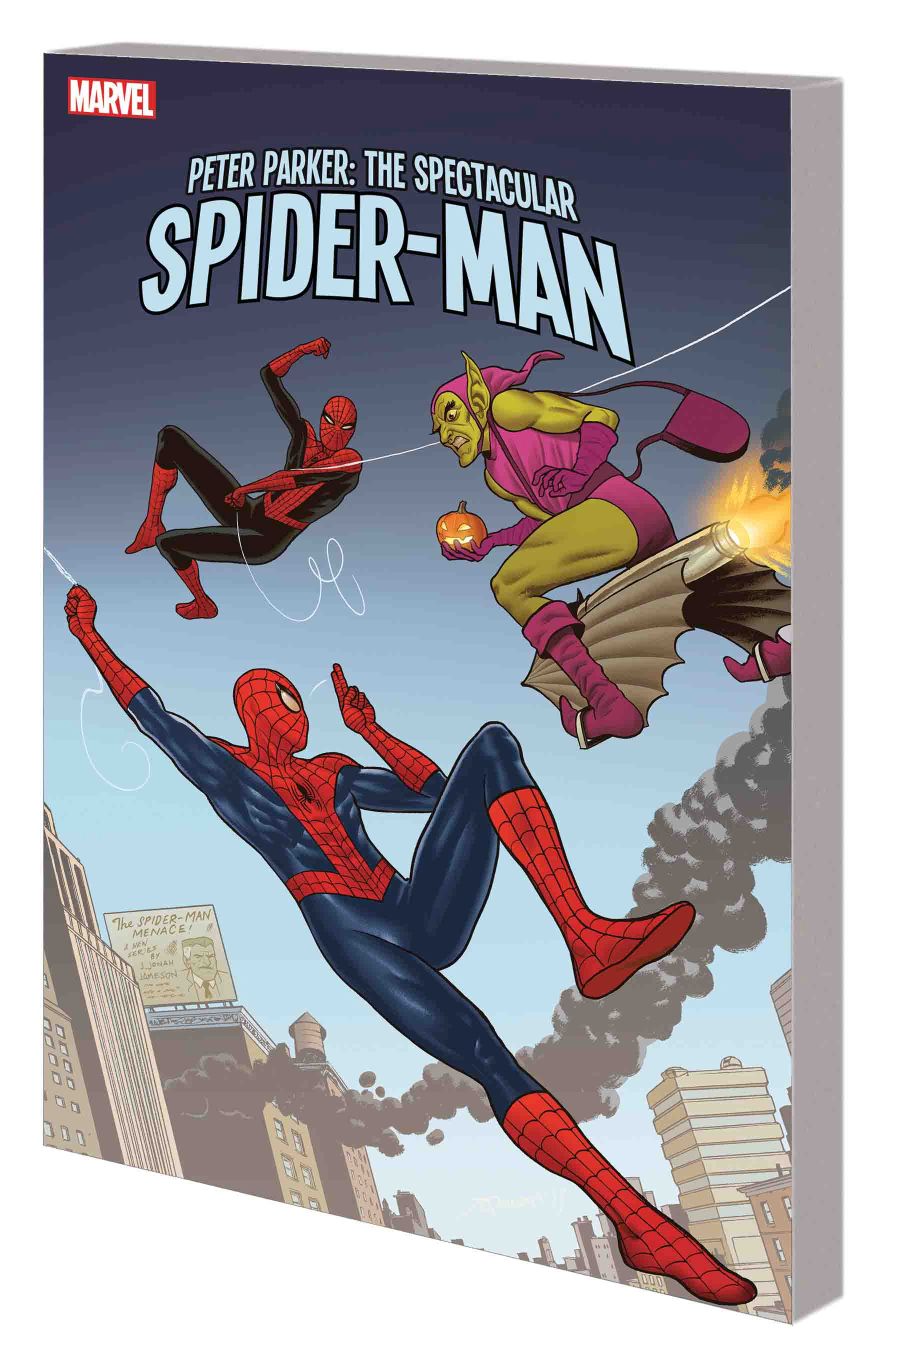 PETER PARKER: THE SPECTACULAR SPIDER-MAN VOL. 3 - AMAZING FANTASY TPB